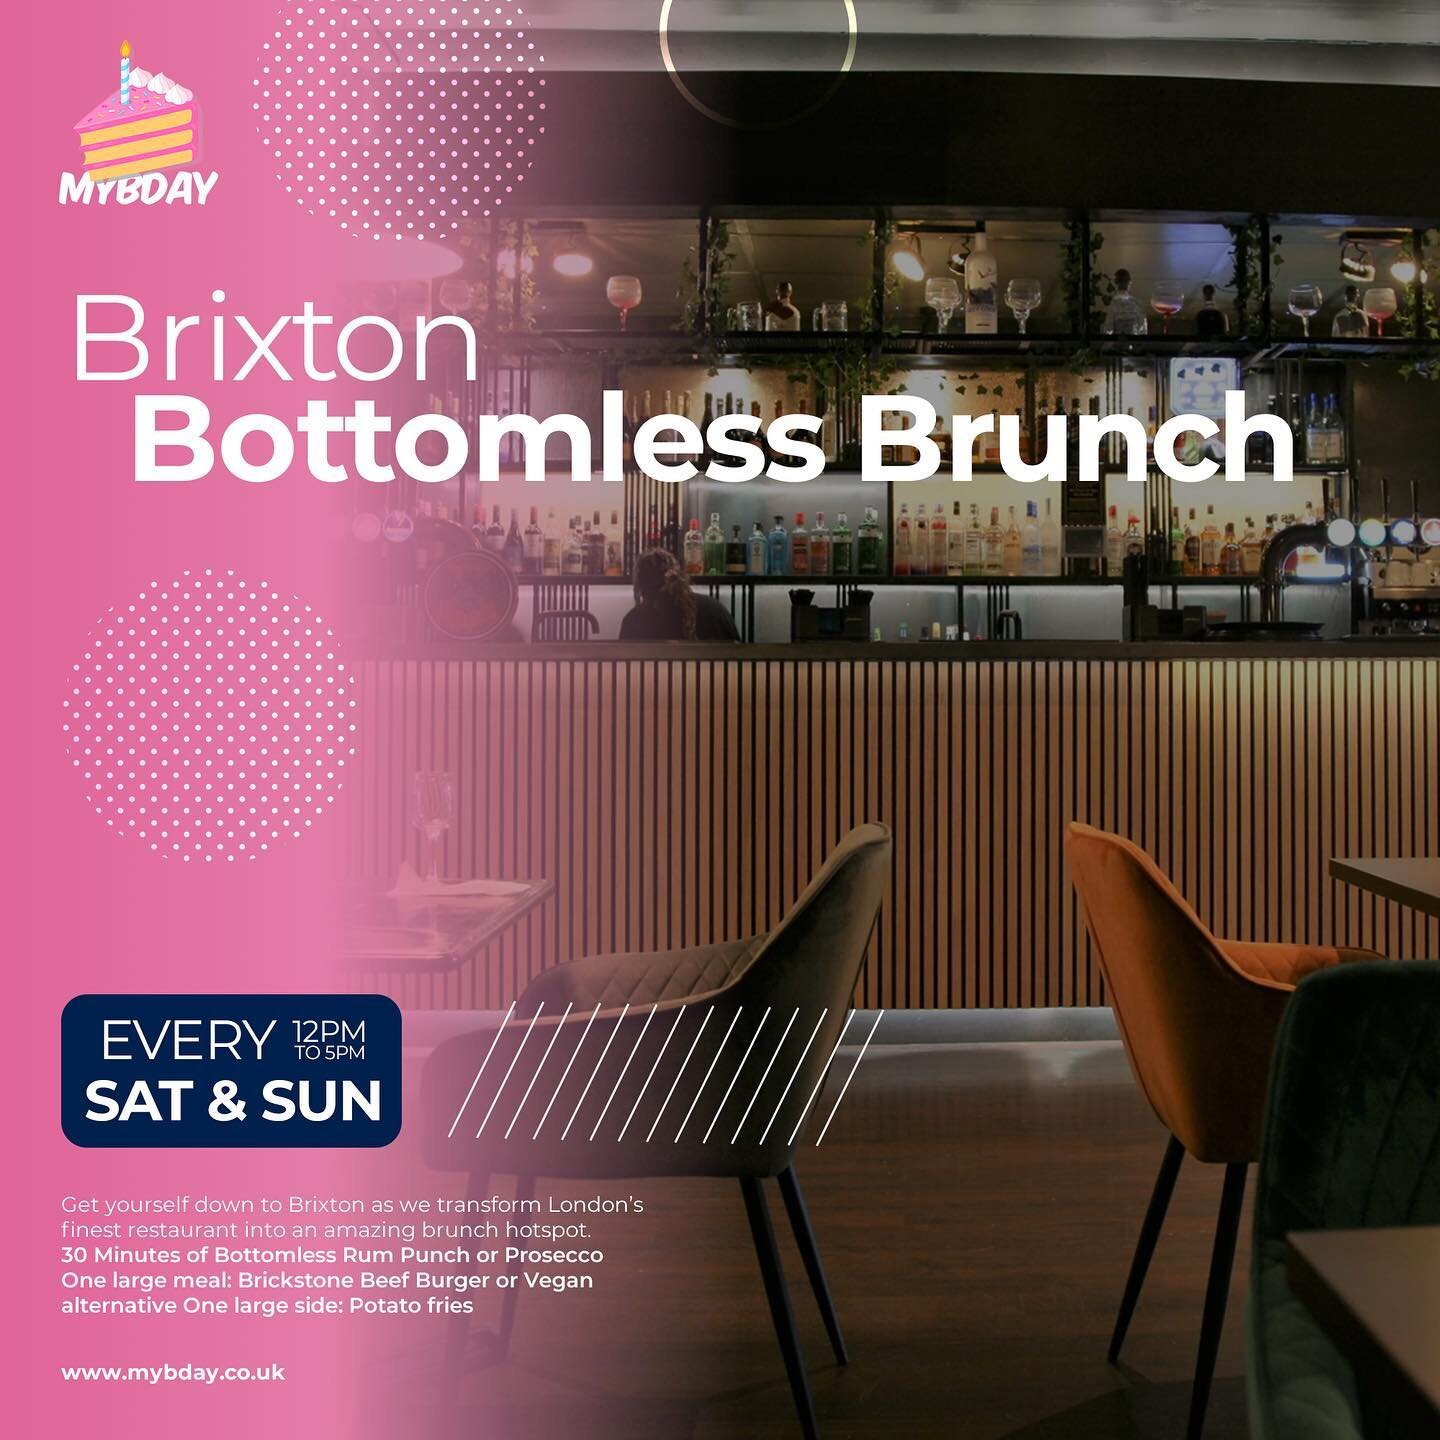 Looking for a brunch that's guaranteed to be a blast? Look no further than The Brickstone in Brixton for a bottomless brunch experience that will have you feeling like royalty! 
Tickets include:
 🎉 30 Minutes of Bottomless Rum Punch or Prosecco 🍔 O